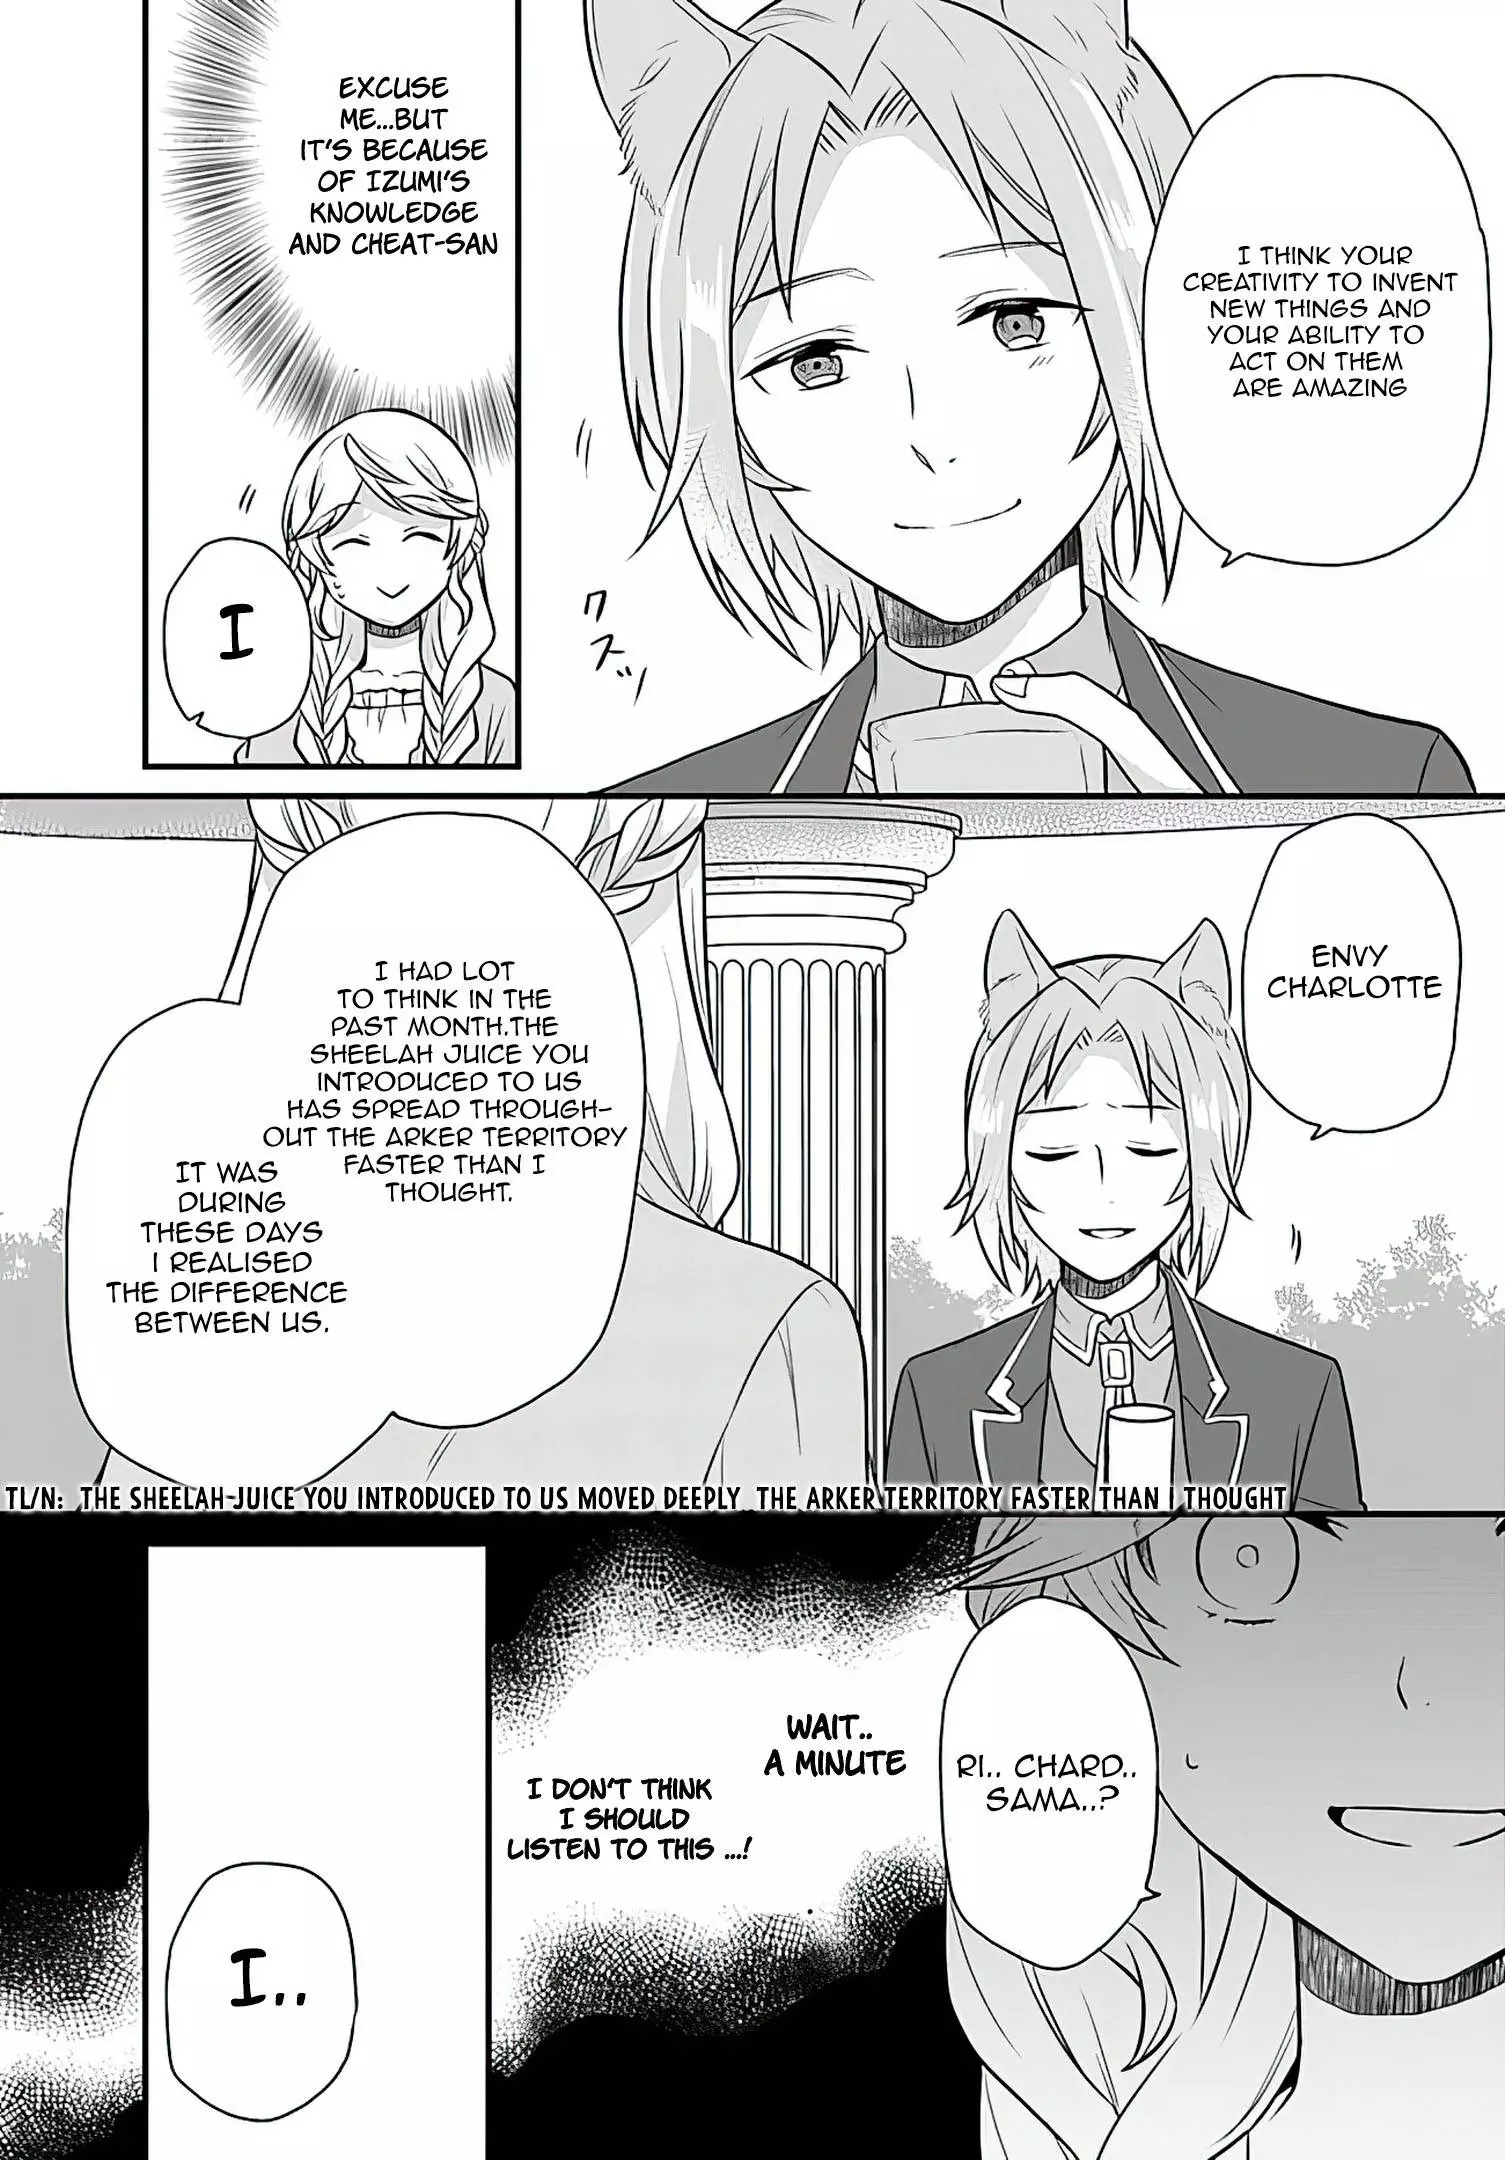 Because Of Her Love For Sake, The Otome Game Setting Was Broken And The Villainous Noblewoman Became The Noblewoman With Cheats - 16 page 16